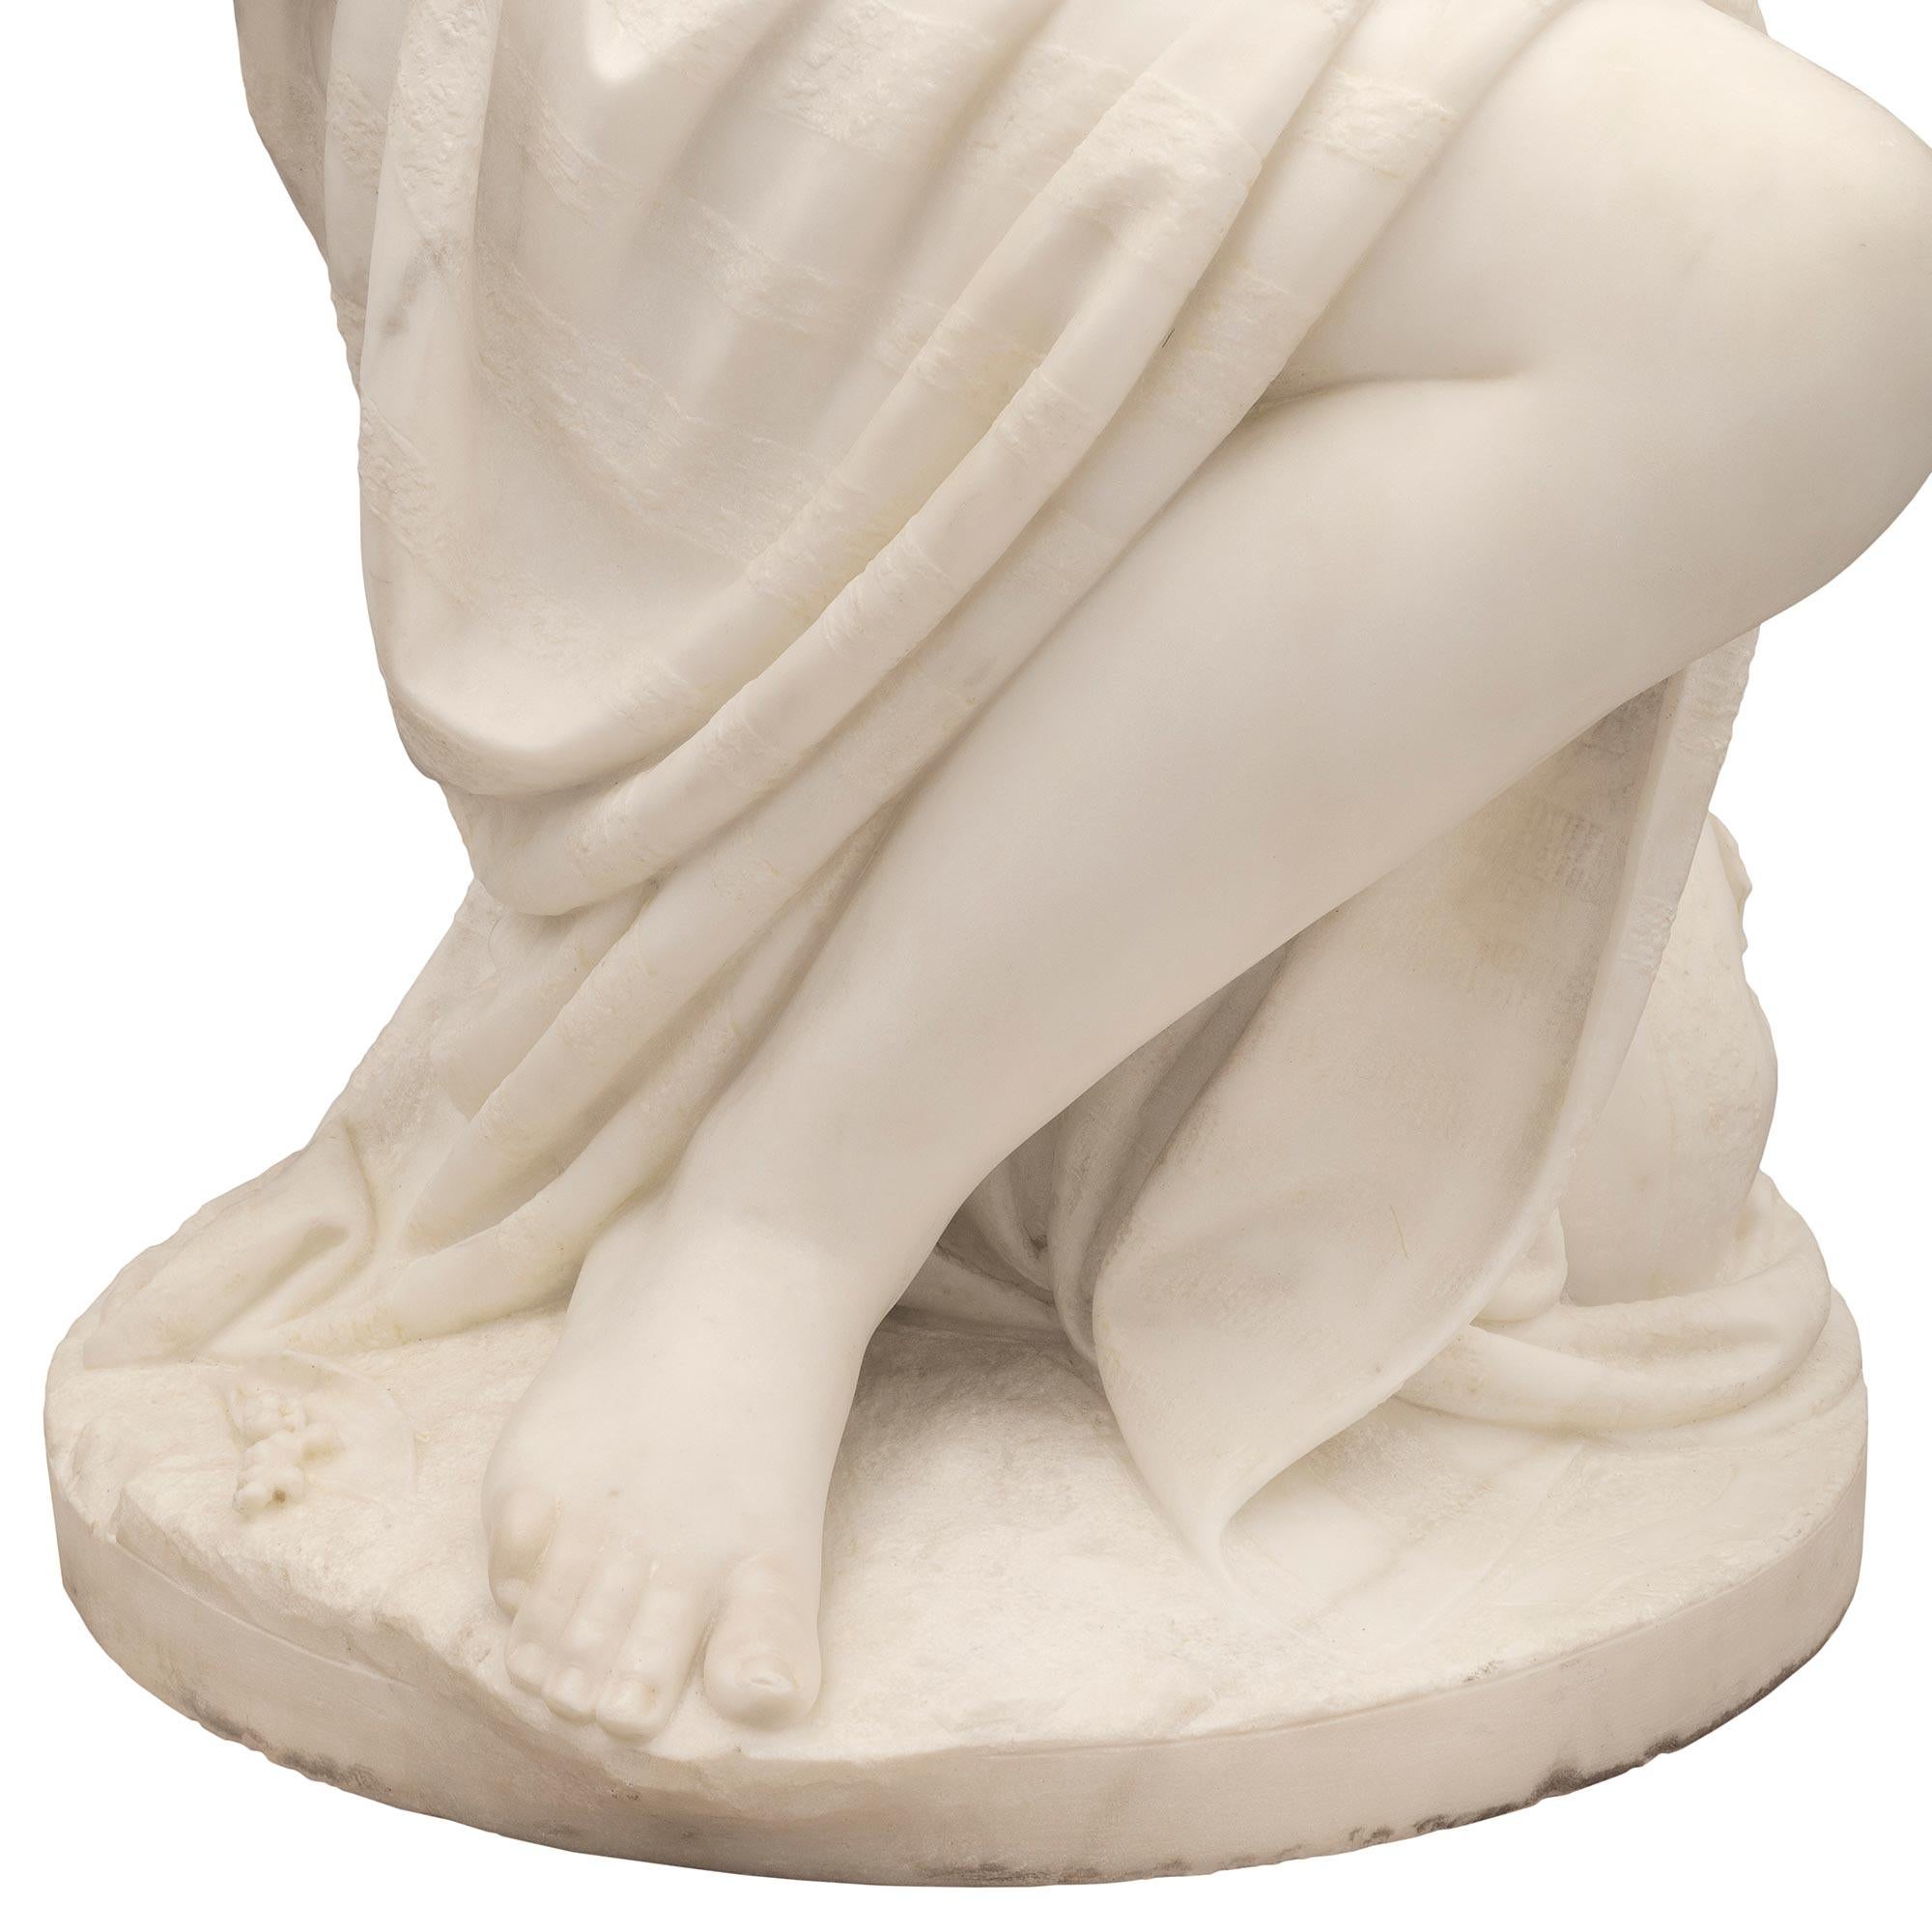 Italian Turn of the Century Marble Statue Signed Prof. R. Romanelli 1909 For Sale 2